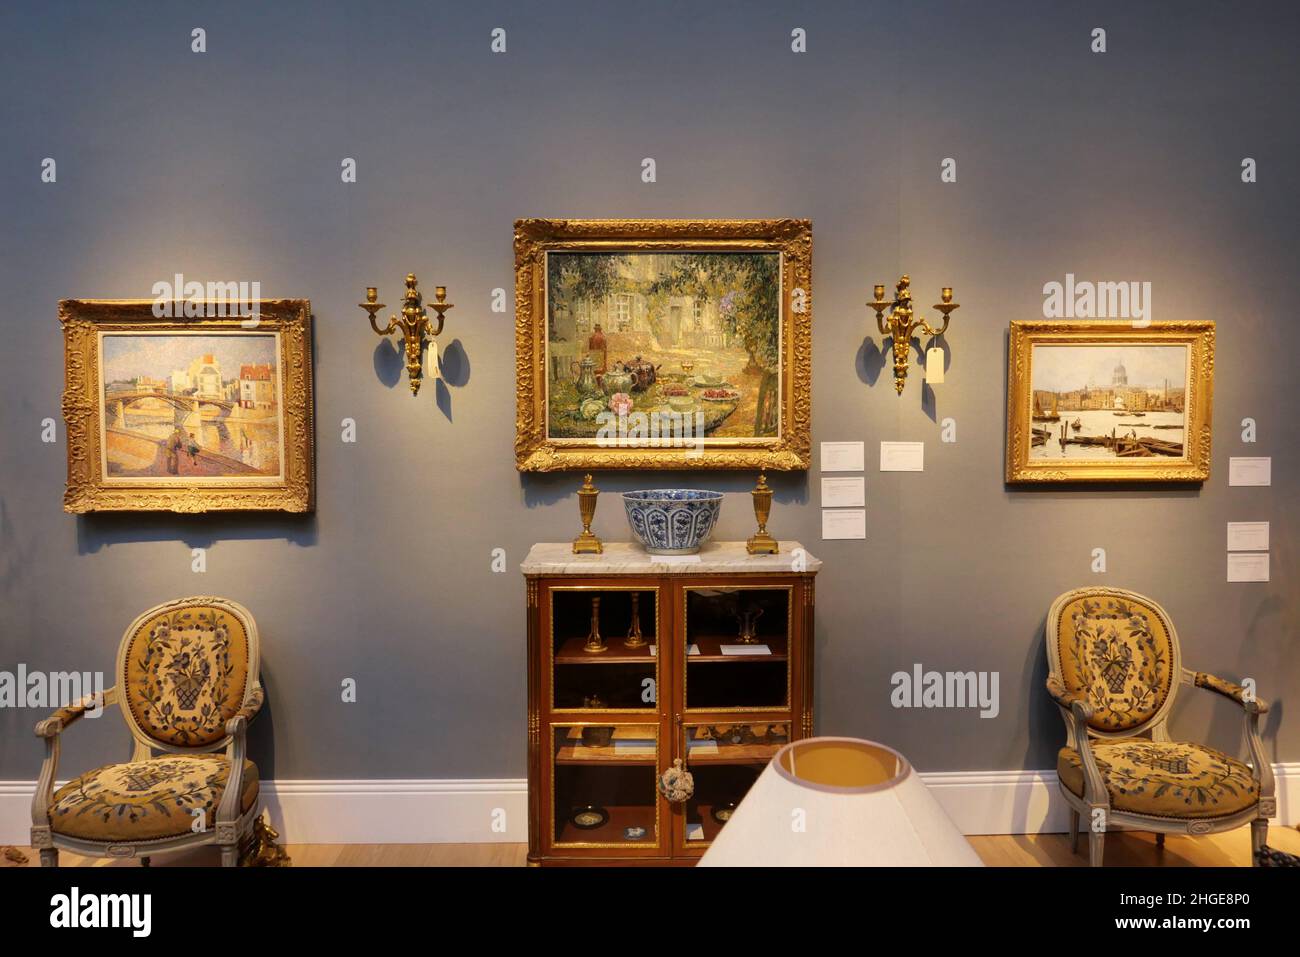 The collection features french decorative arts , furniture and paintings ,  predominantly from the late 19 th century . each room had a distinct  identity and aesthetic , created by Graf for